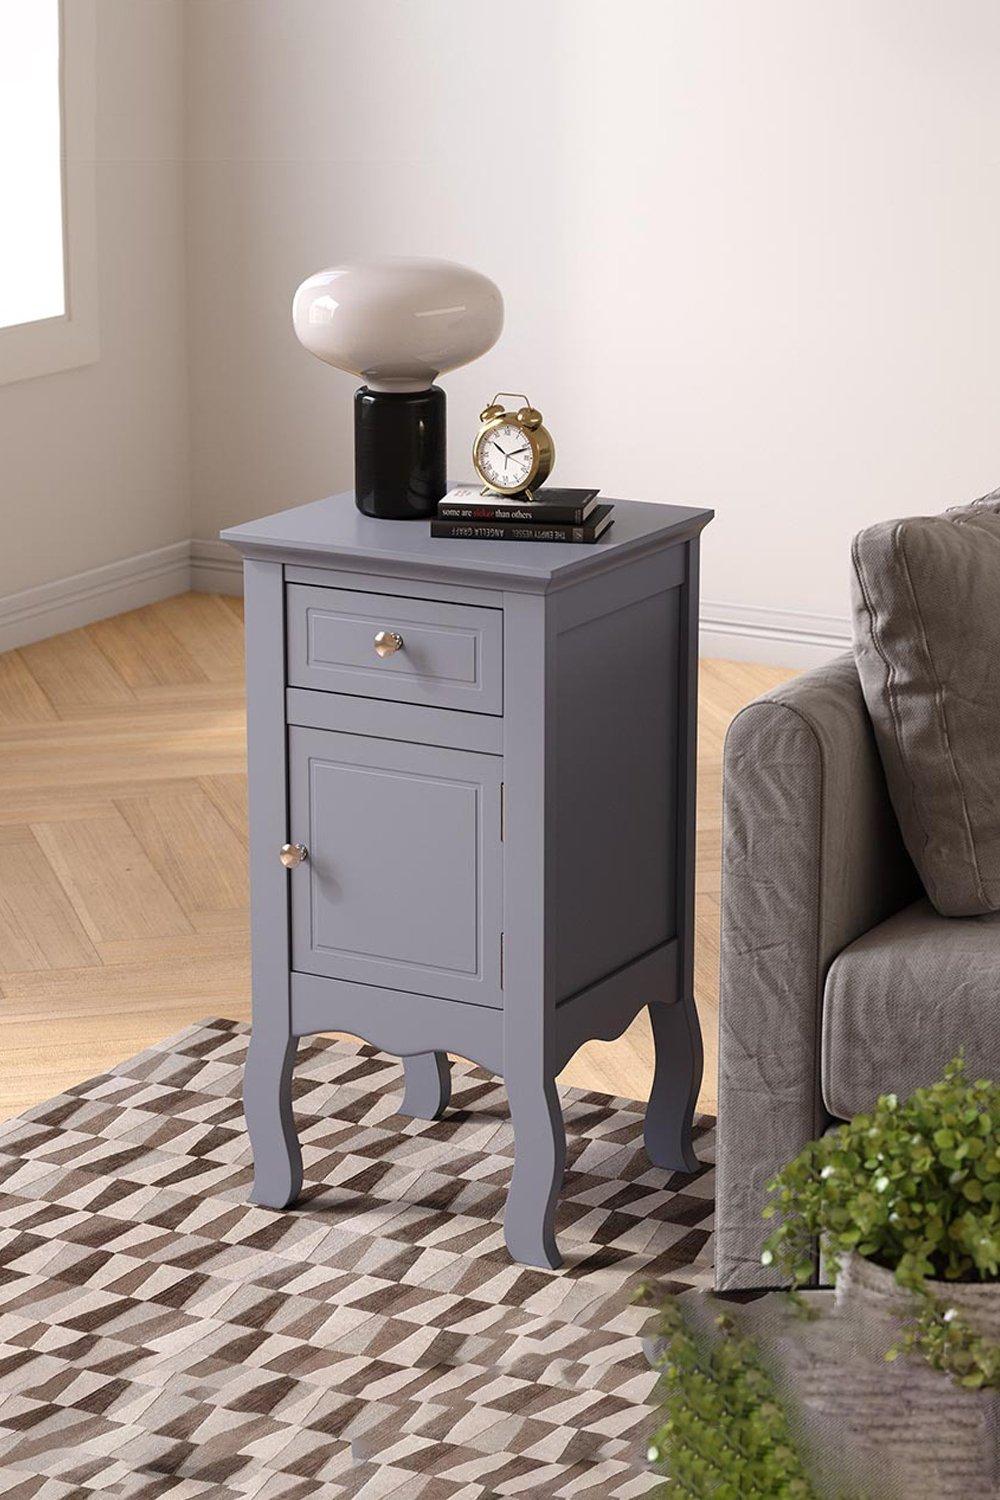 Wooden Bedside Side Table Nightstand with Drawer